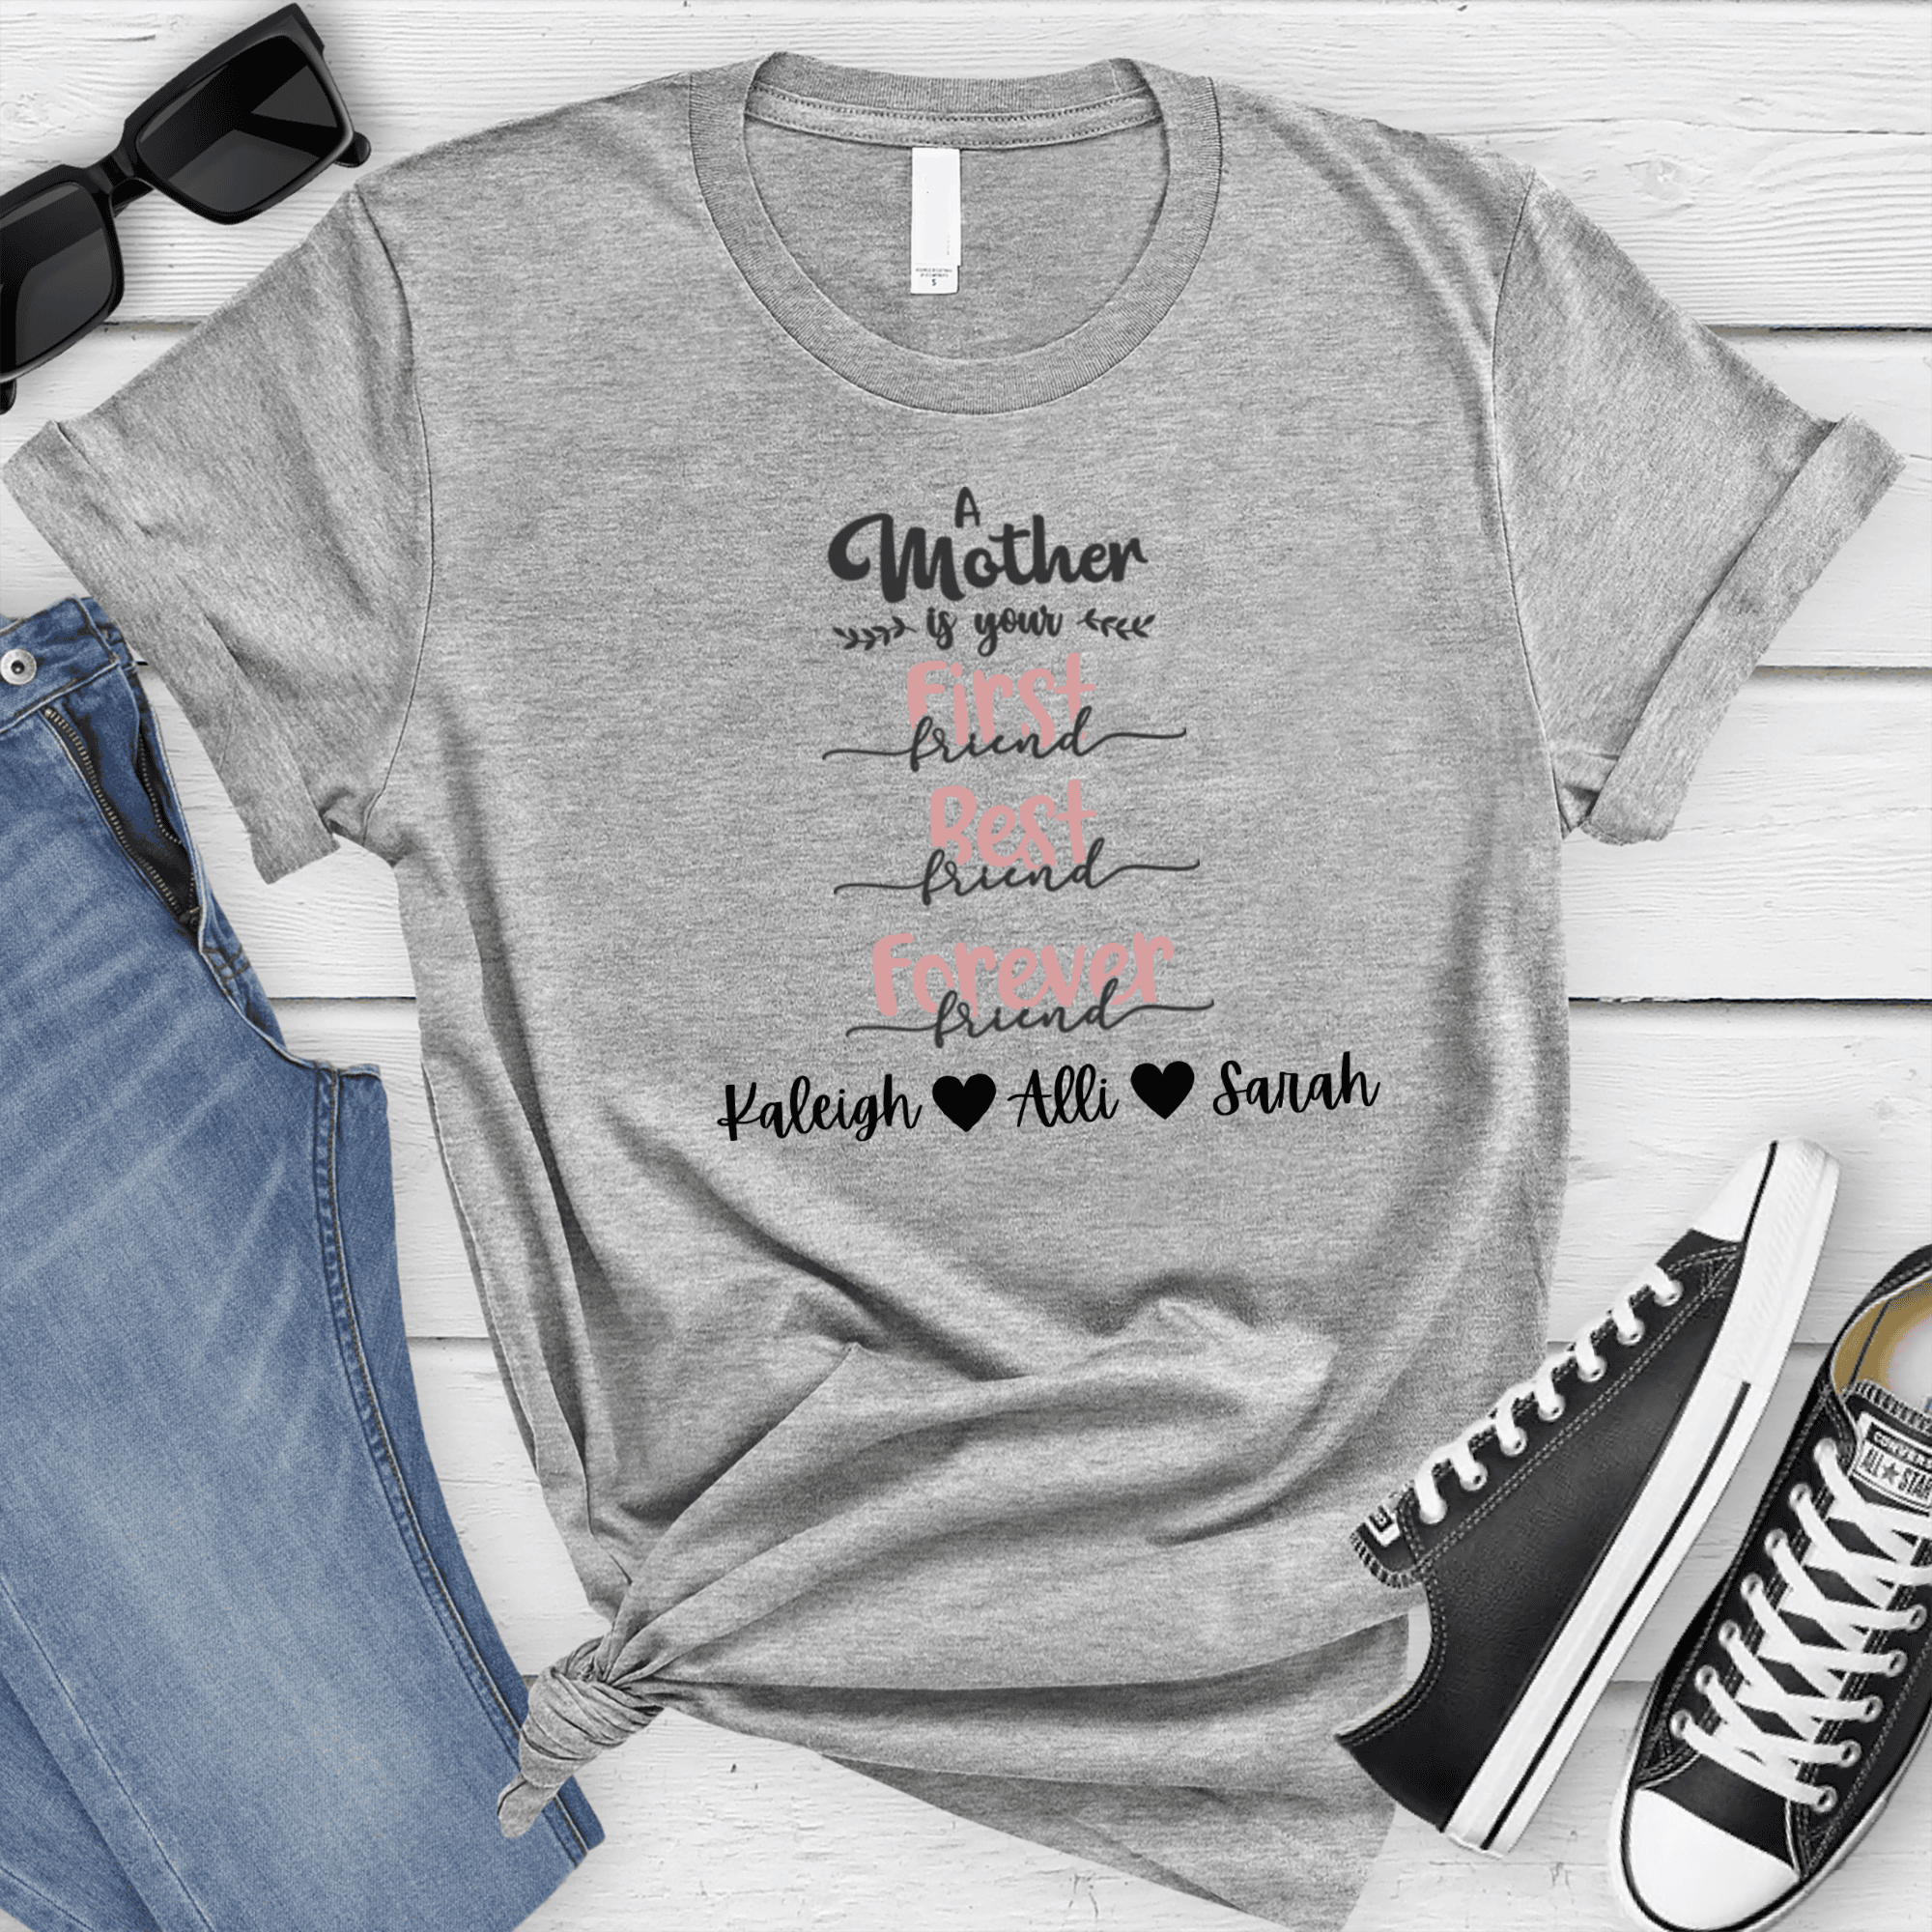 Womens Grey T Shirt with Moms-Are-First design